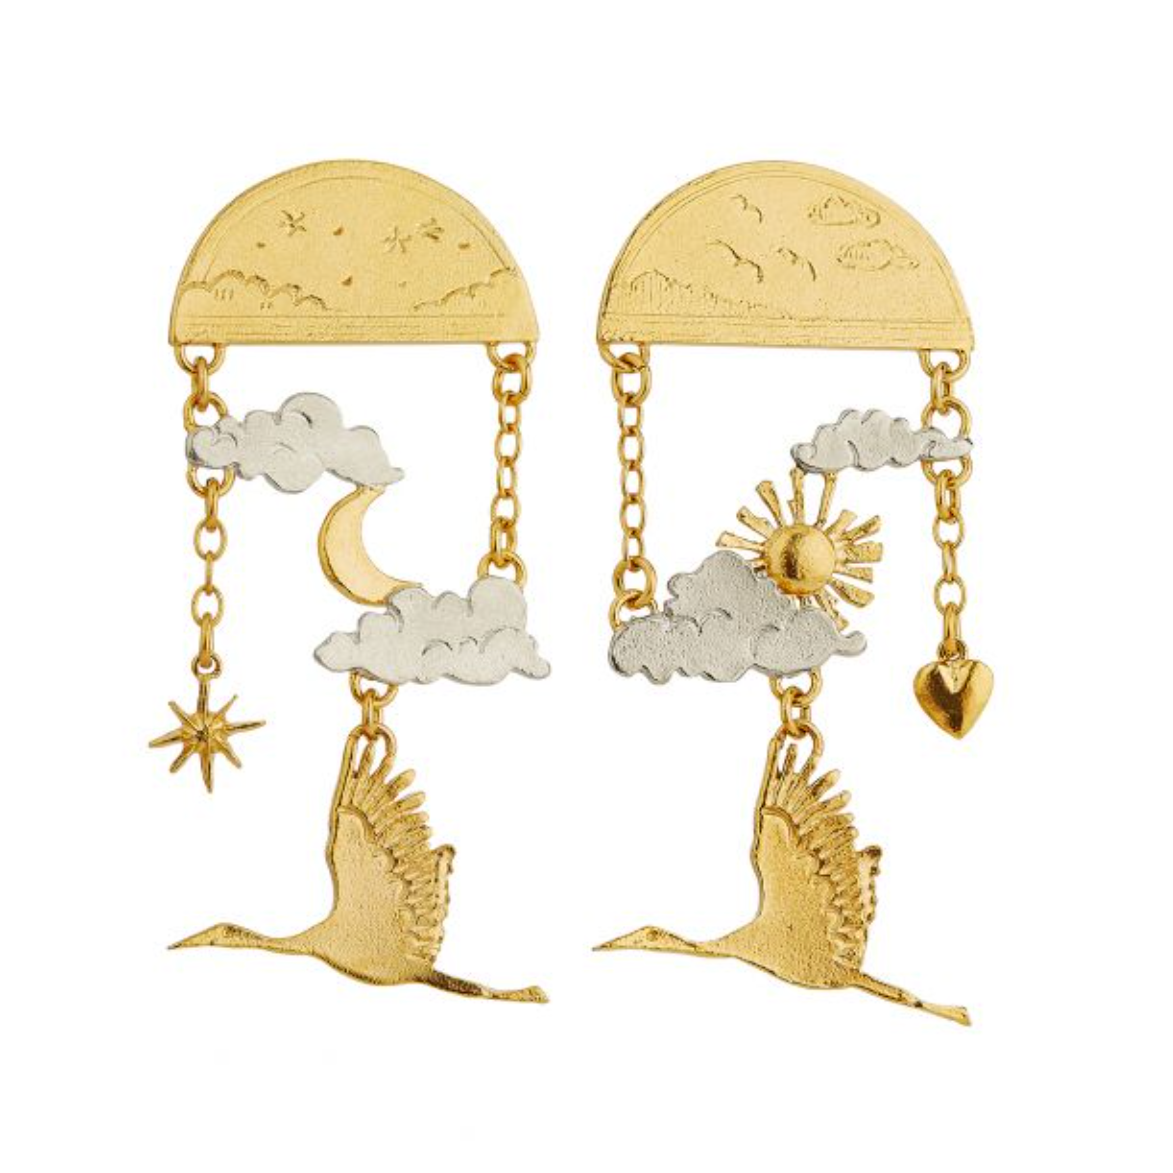 gold and sterling silver dangle stud earrings with sunrise and sunset engraving, chain, moon, star, cloud, and stork details on a white background